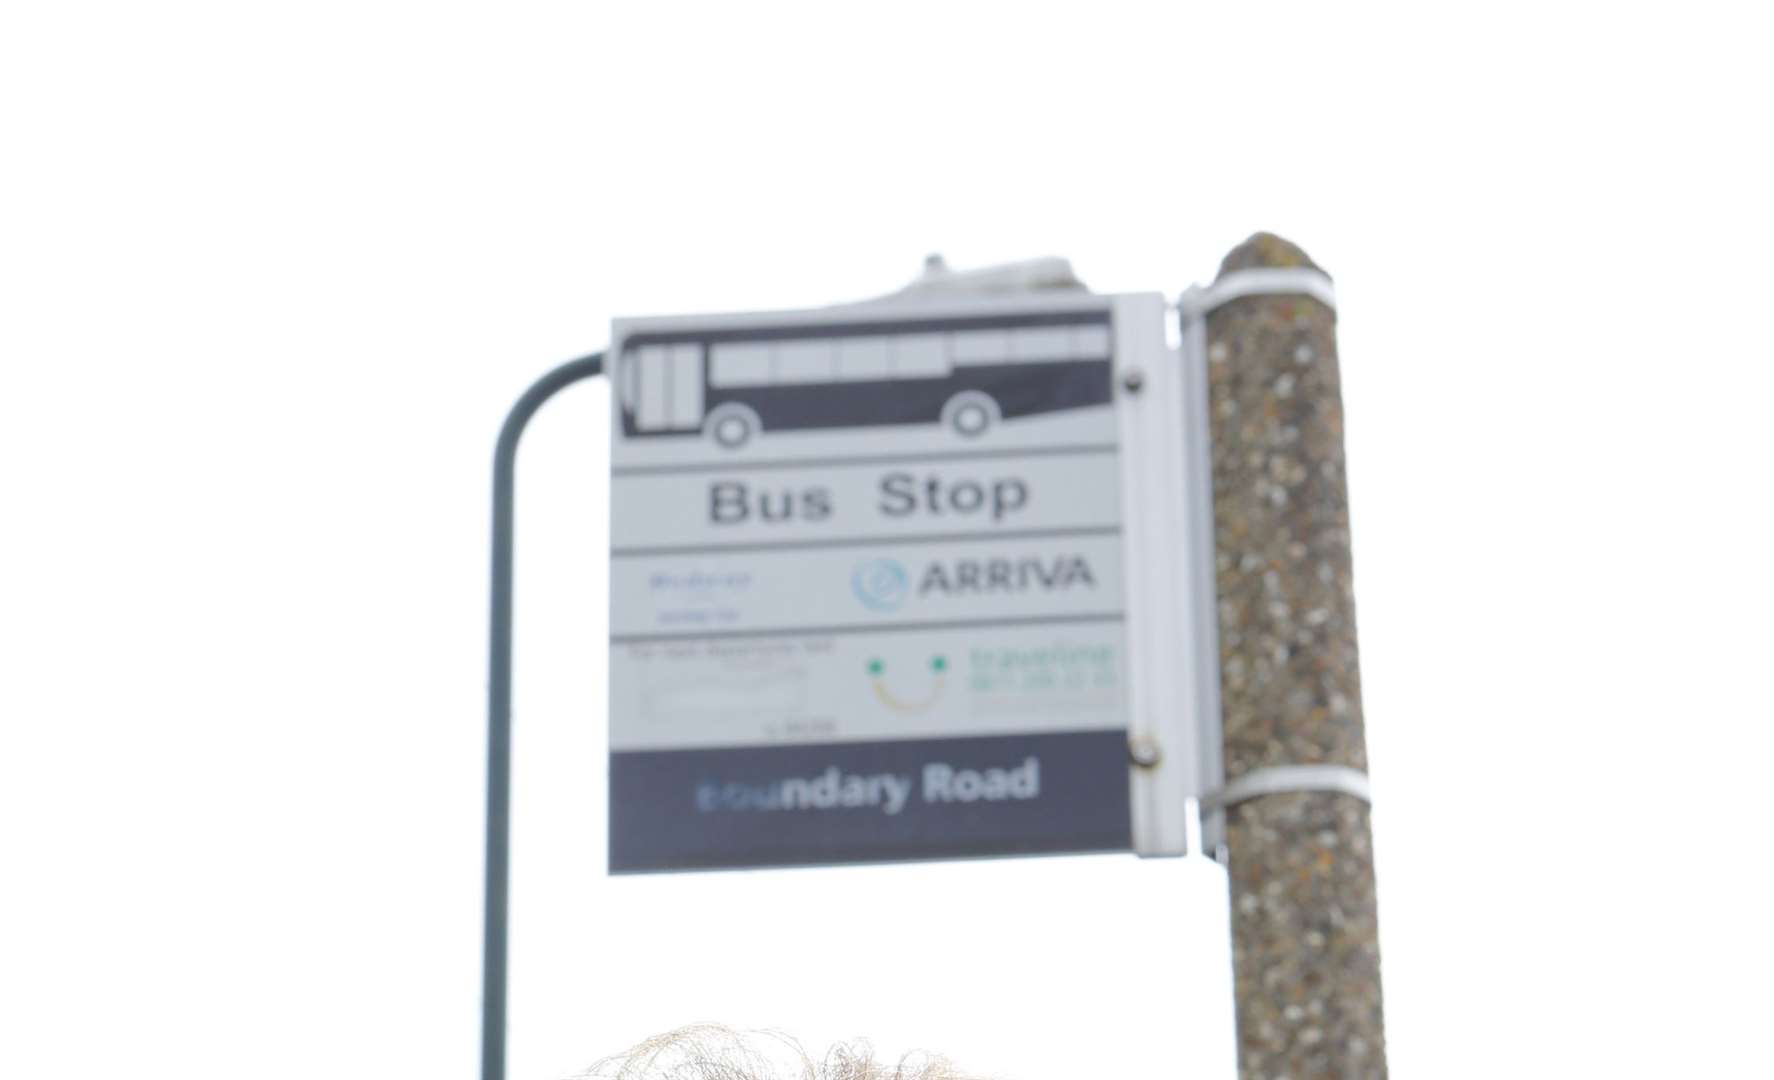 New bus services are being launched over the coming weeks across Kent.